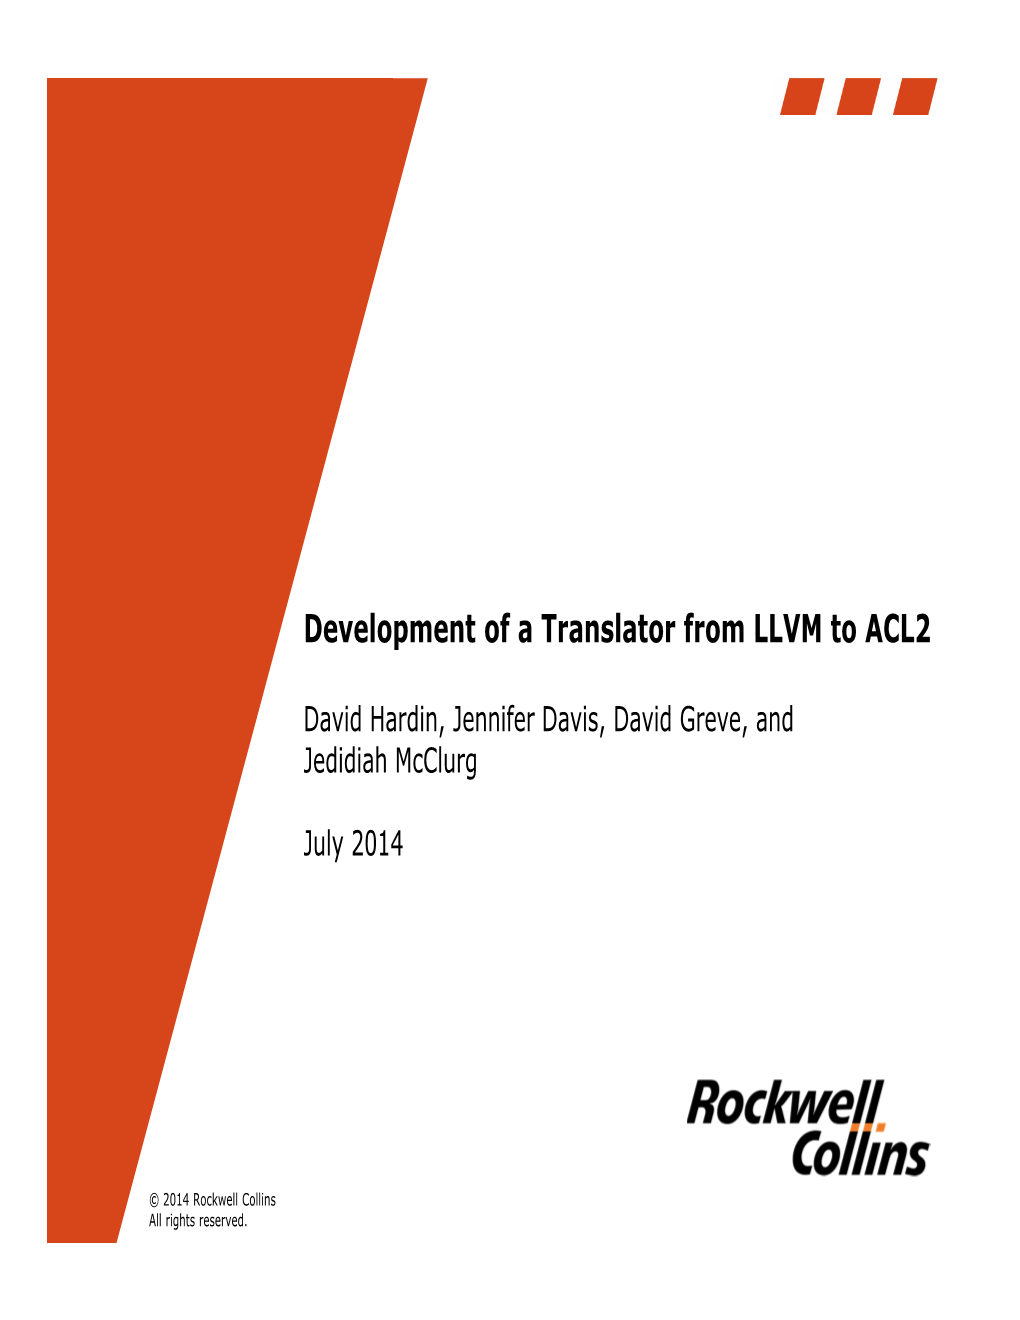 Development of a Translator from LLVM to ACL2